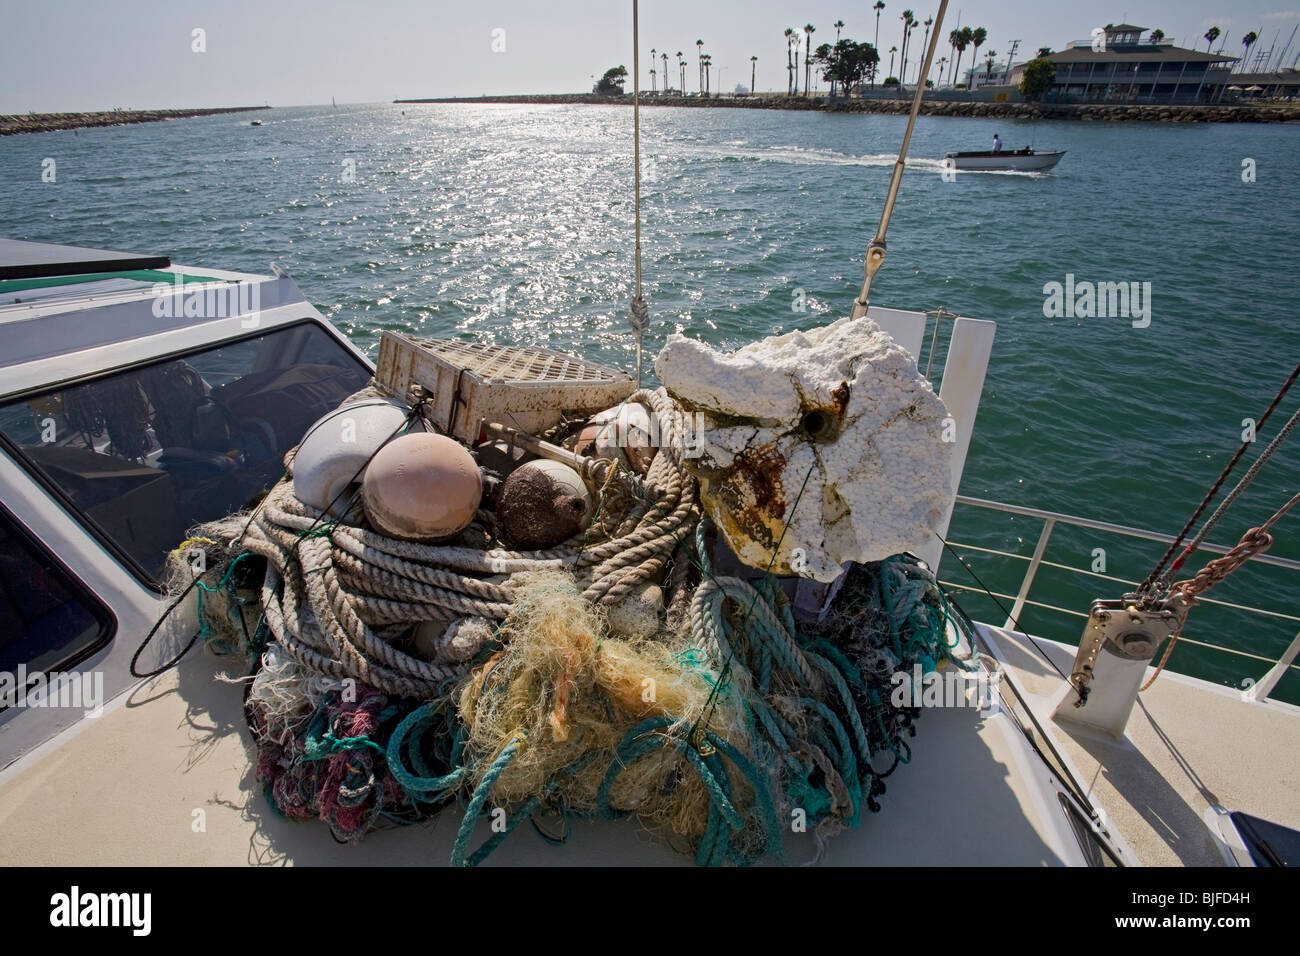 Plastic samples and trash collected in the North Pacific Gyre. Long Beach, California, USA. Stock Photo